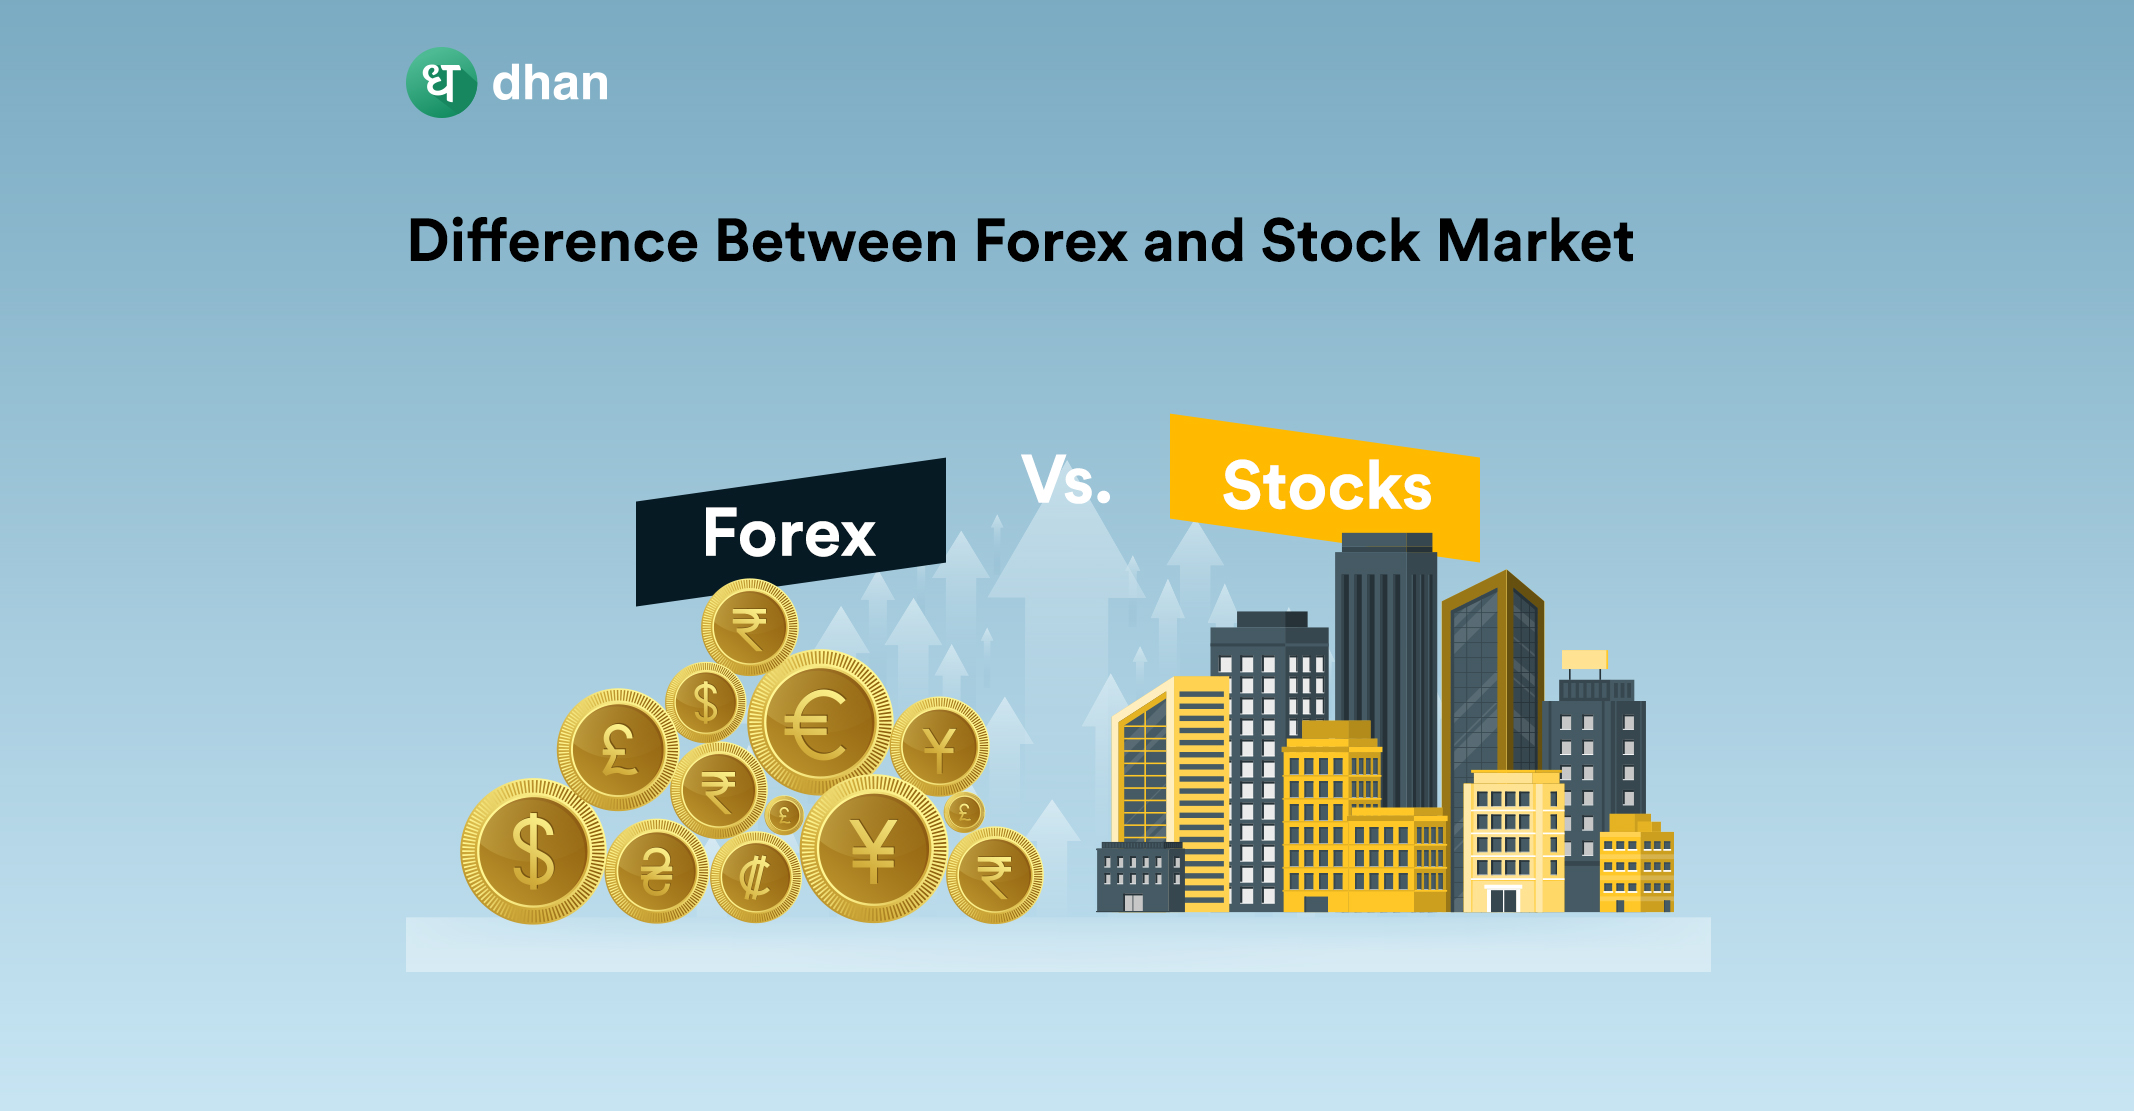 Difference Between Forex and Stock Market